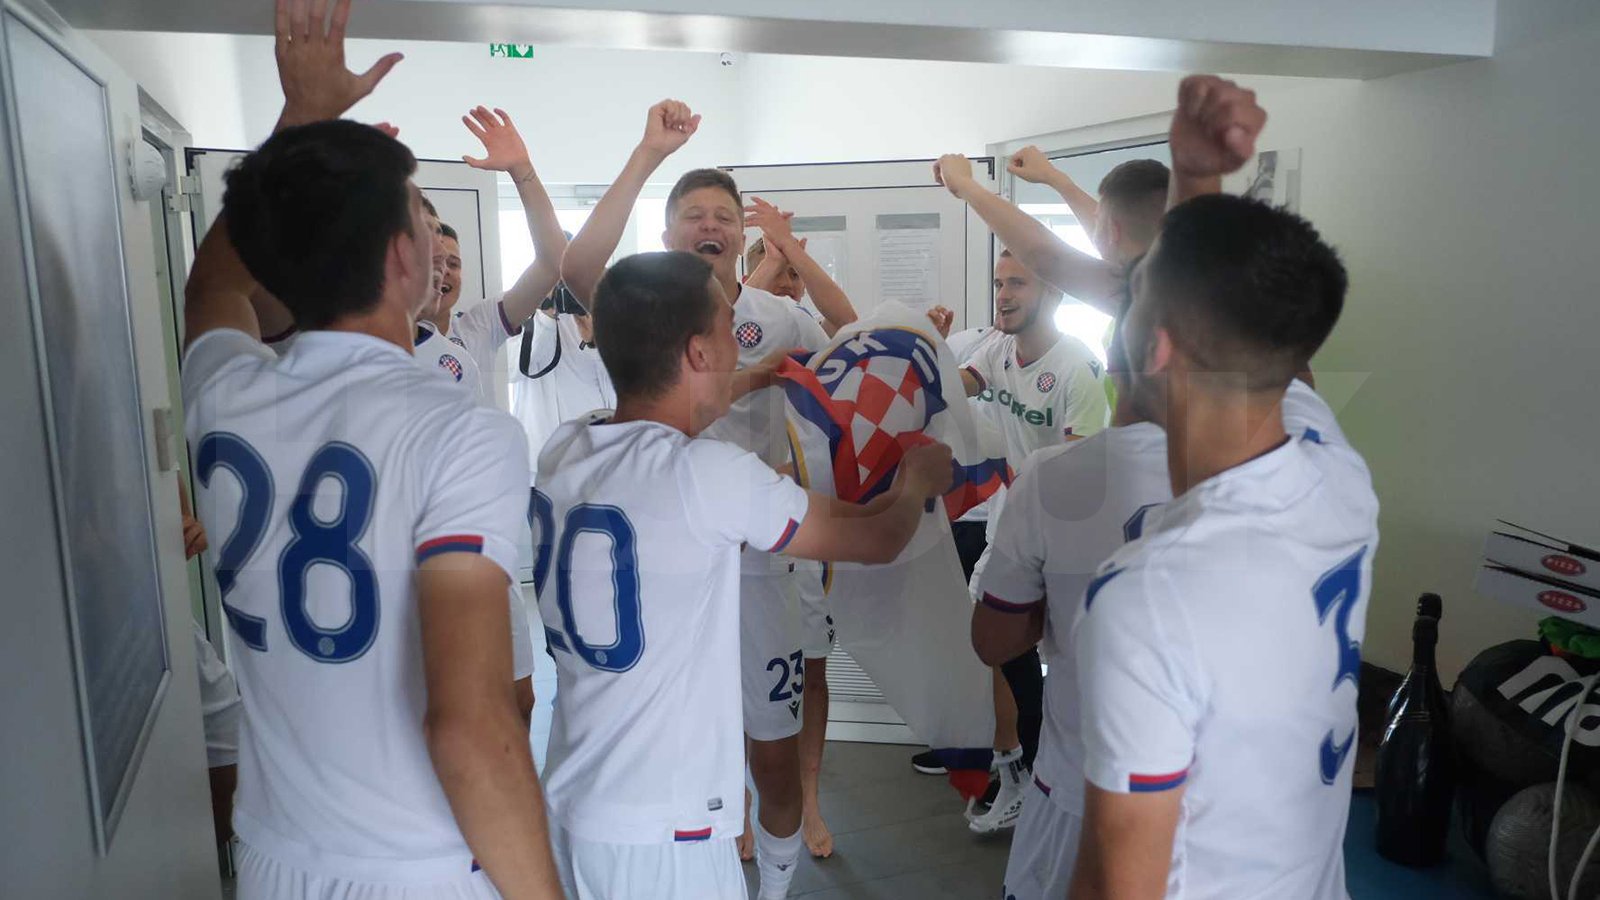 Karlo on X: Hajduk U19 finally get to lift the Prva HNL U19 trophy after  the last season game against Dugopolje U19 which they won 3-0 🏆 Game also  had to be